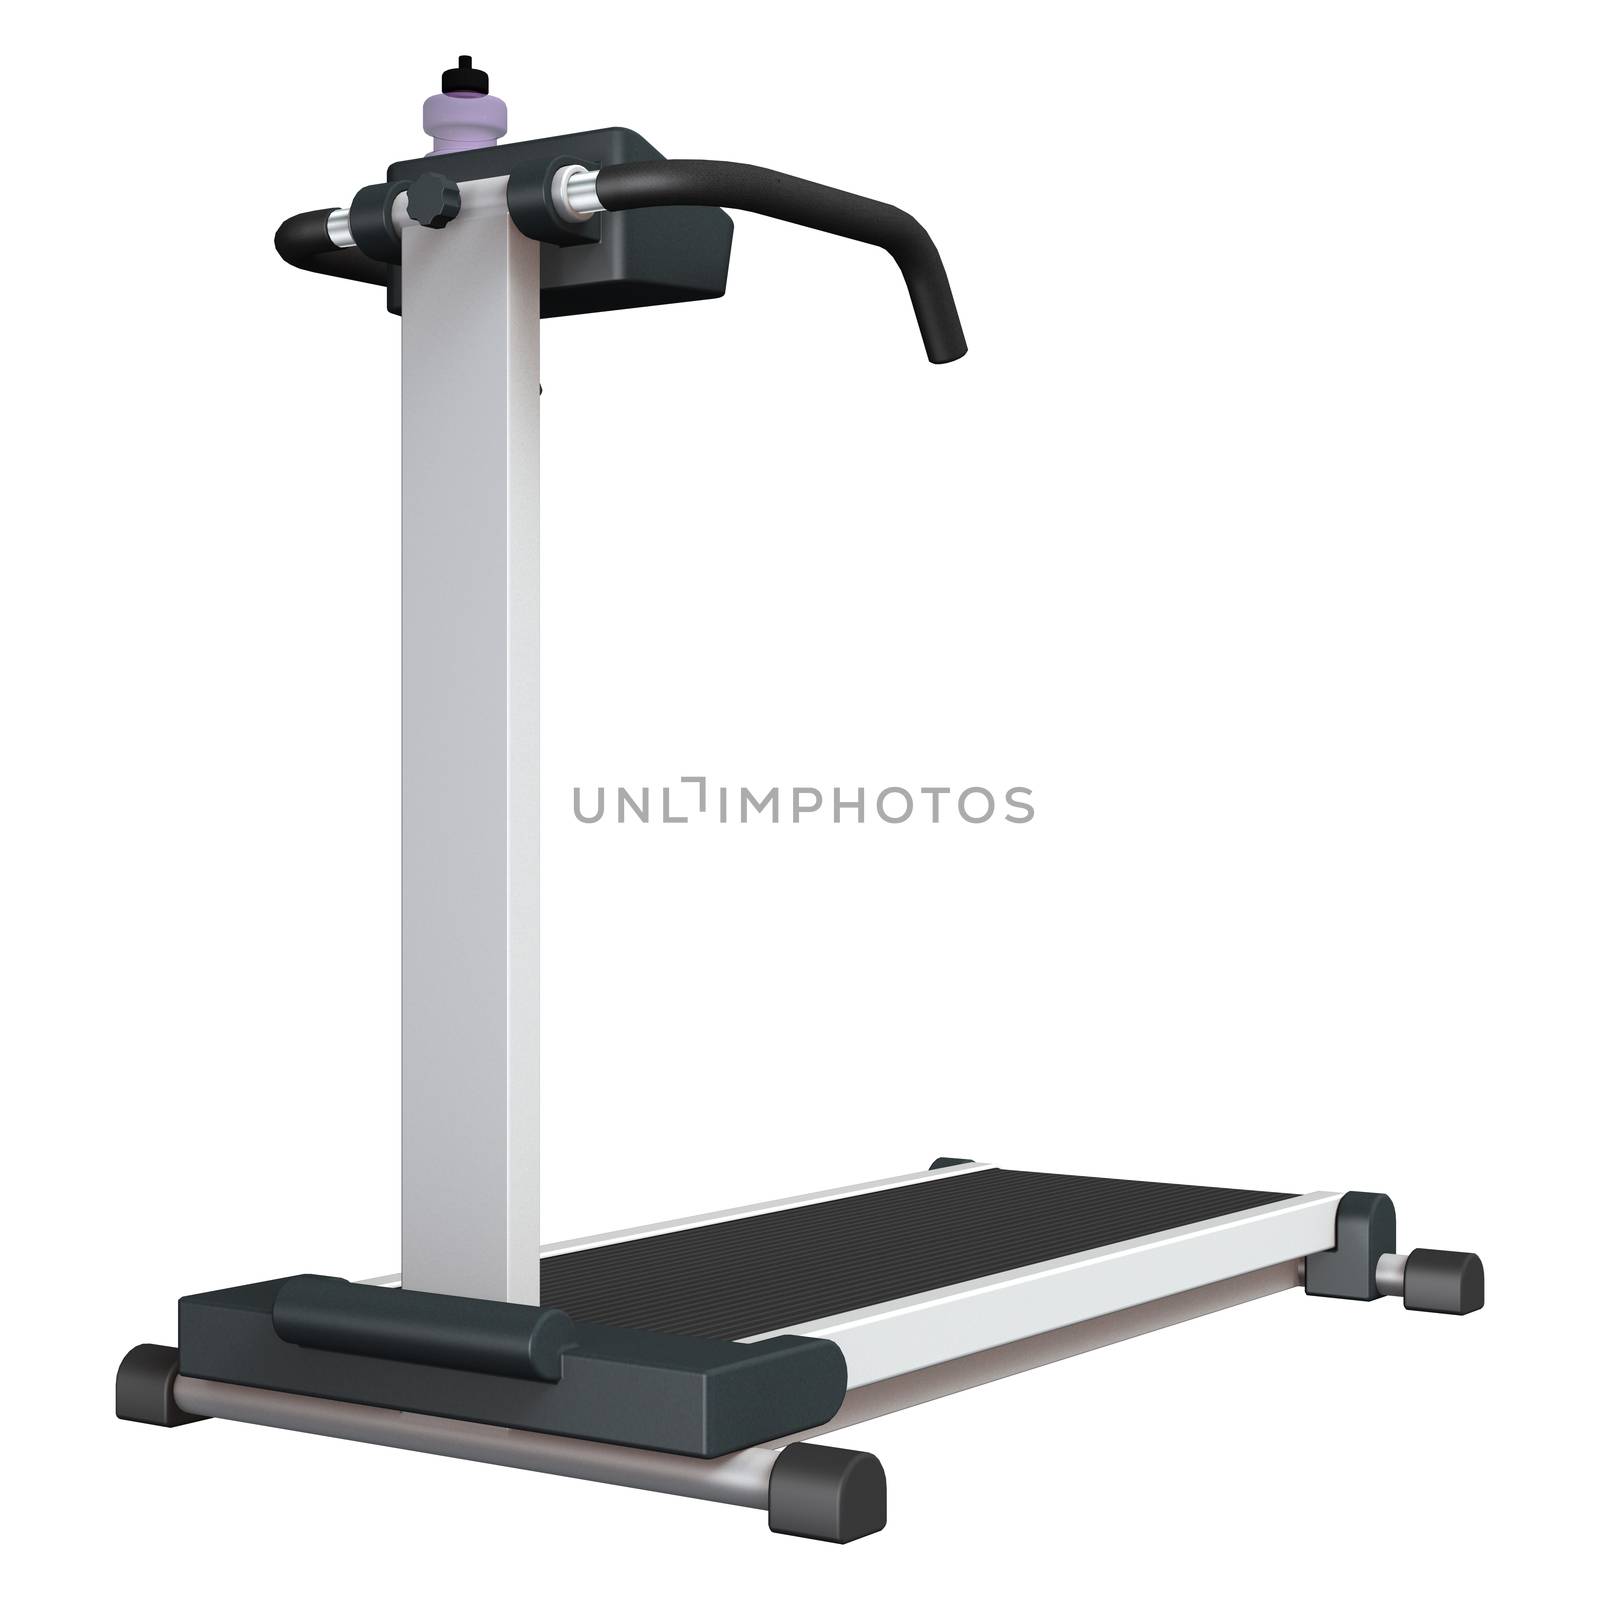  Treadmill on White by Vac